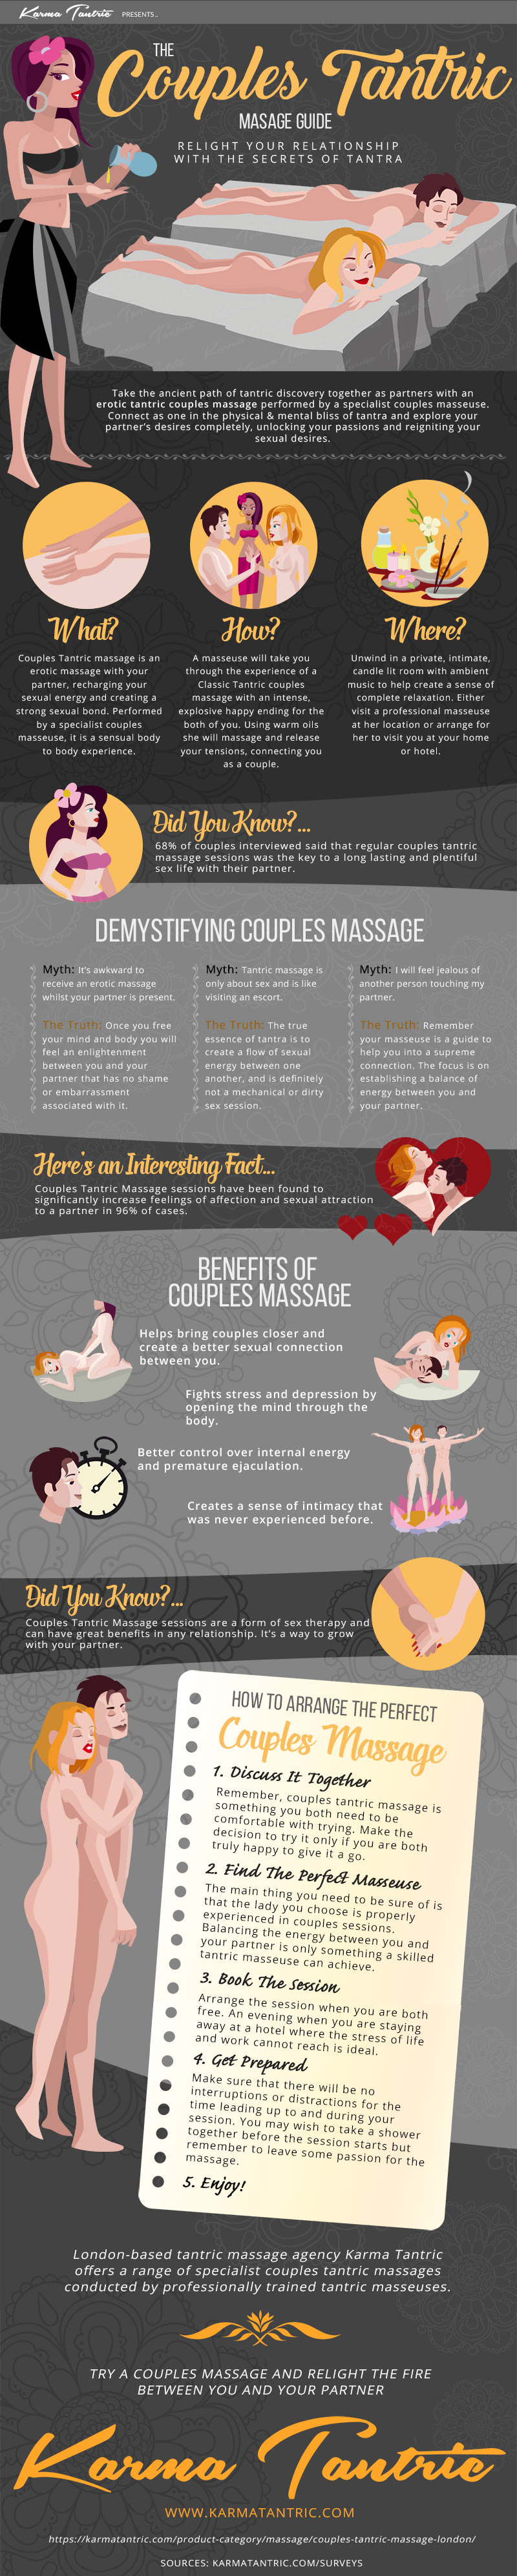 The Couples Tantric Massage Guide (infographic)